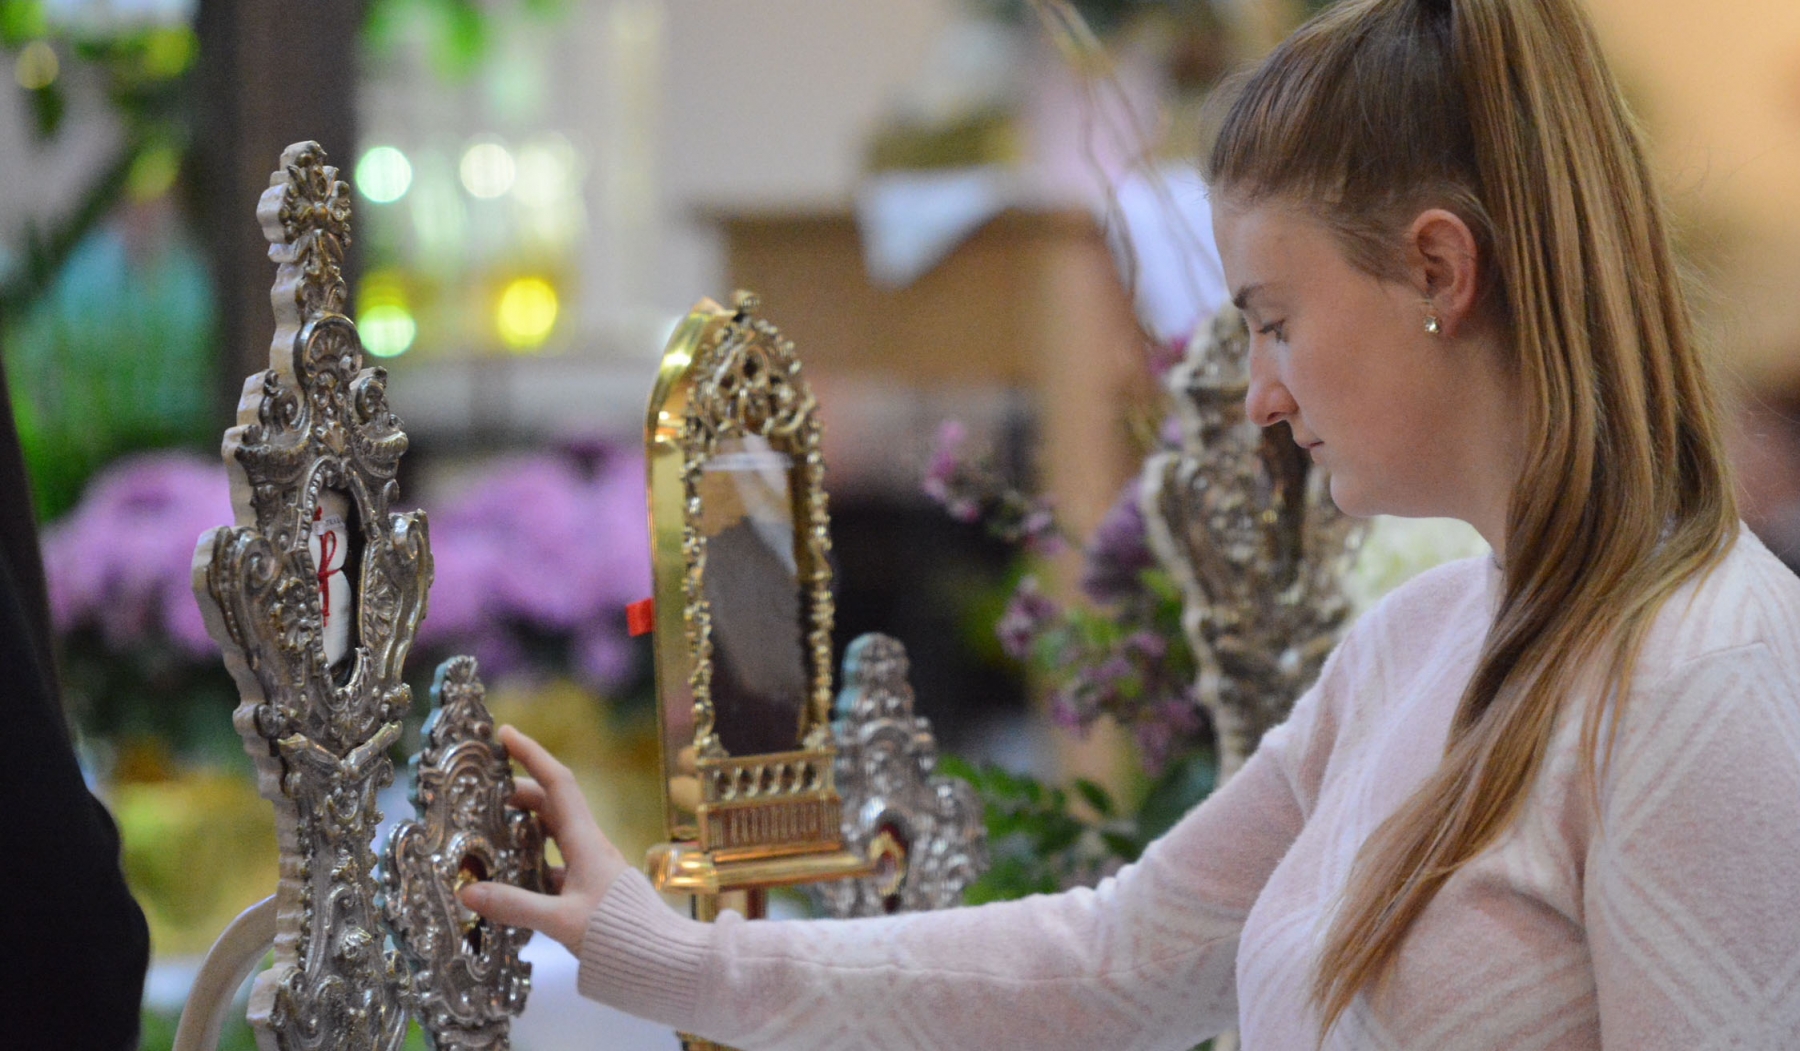 Courtney Kline, St. John Vianney, Orchard Park, touches one of the St. Pio of Pietrelcina relics on display at St. Gabriel Church, Elma. Photo by Patrick McPartland/Managing Editor